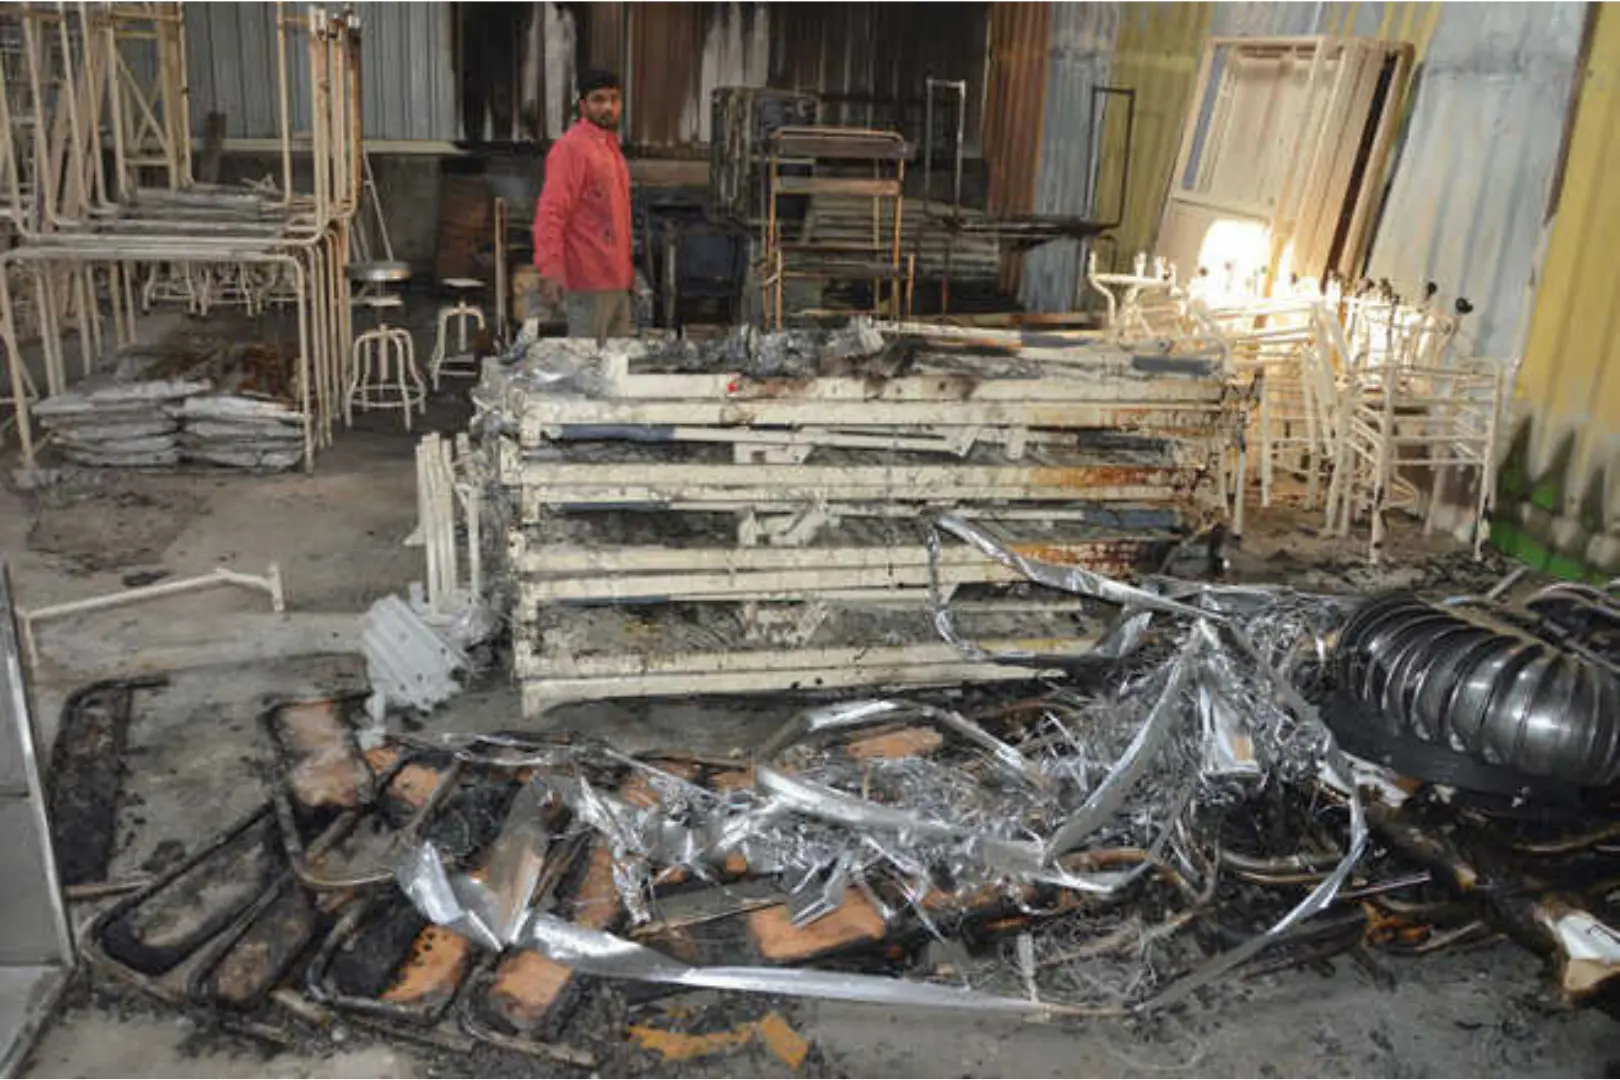 Telangana: A furniture manufacturing business in Hyderabad has a fire that results in one death and six injuries.